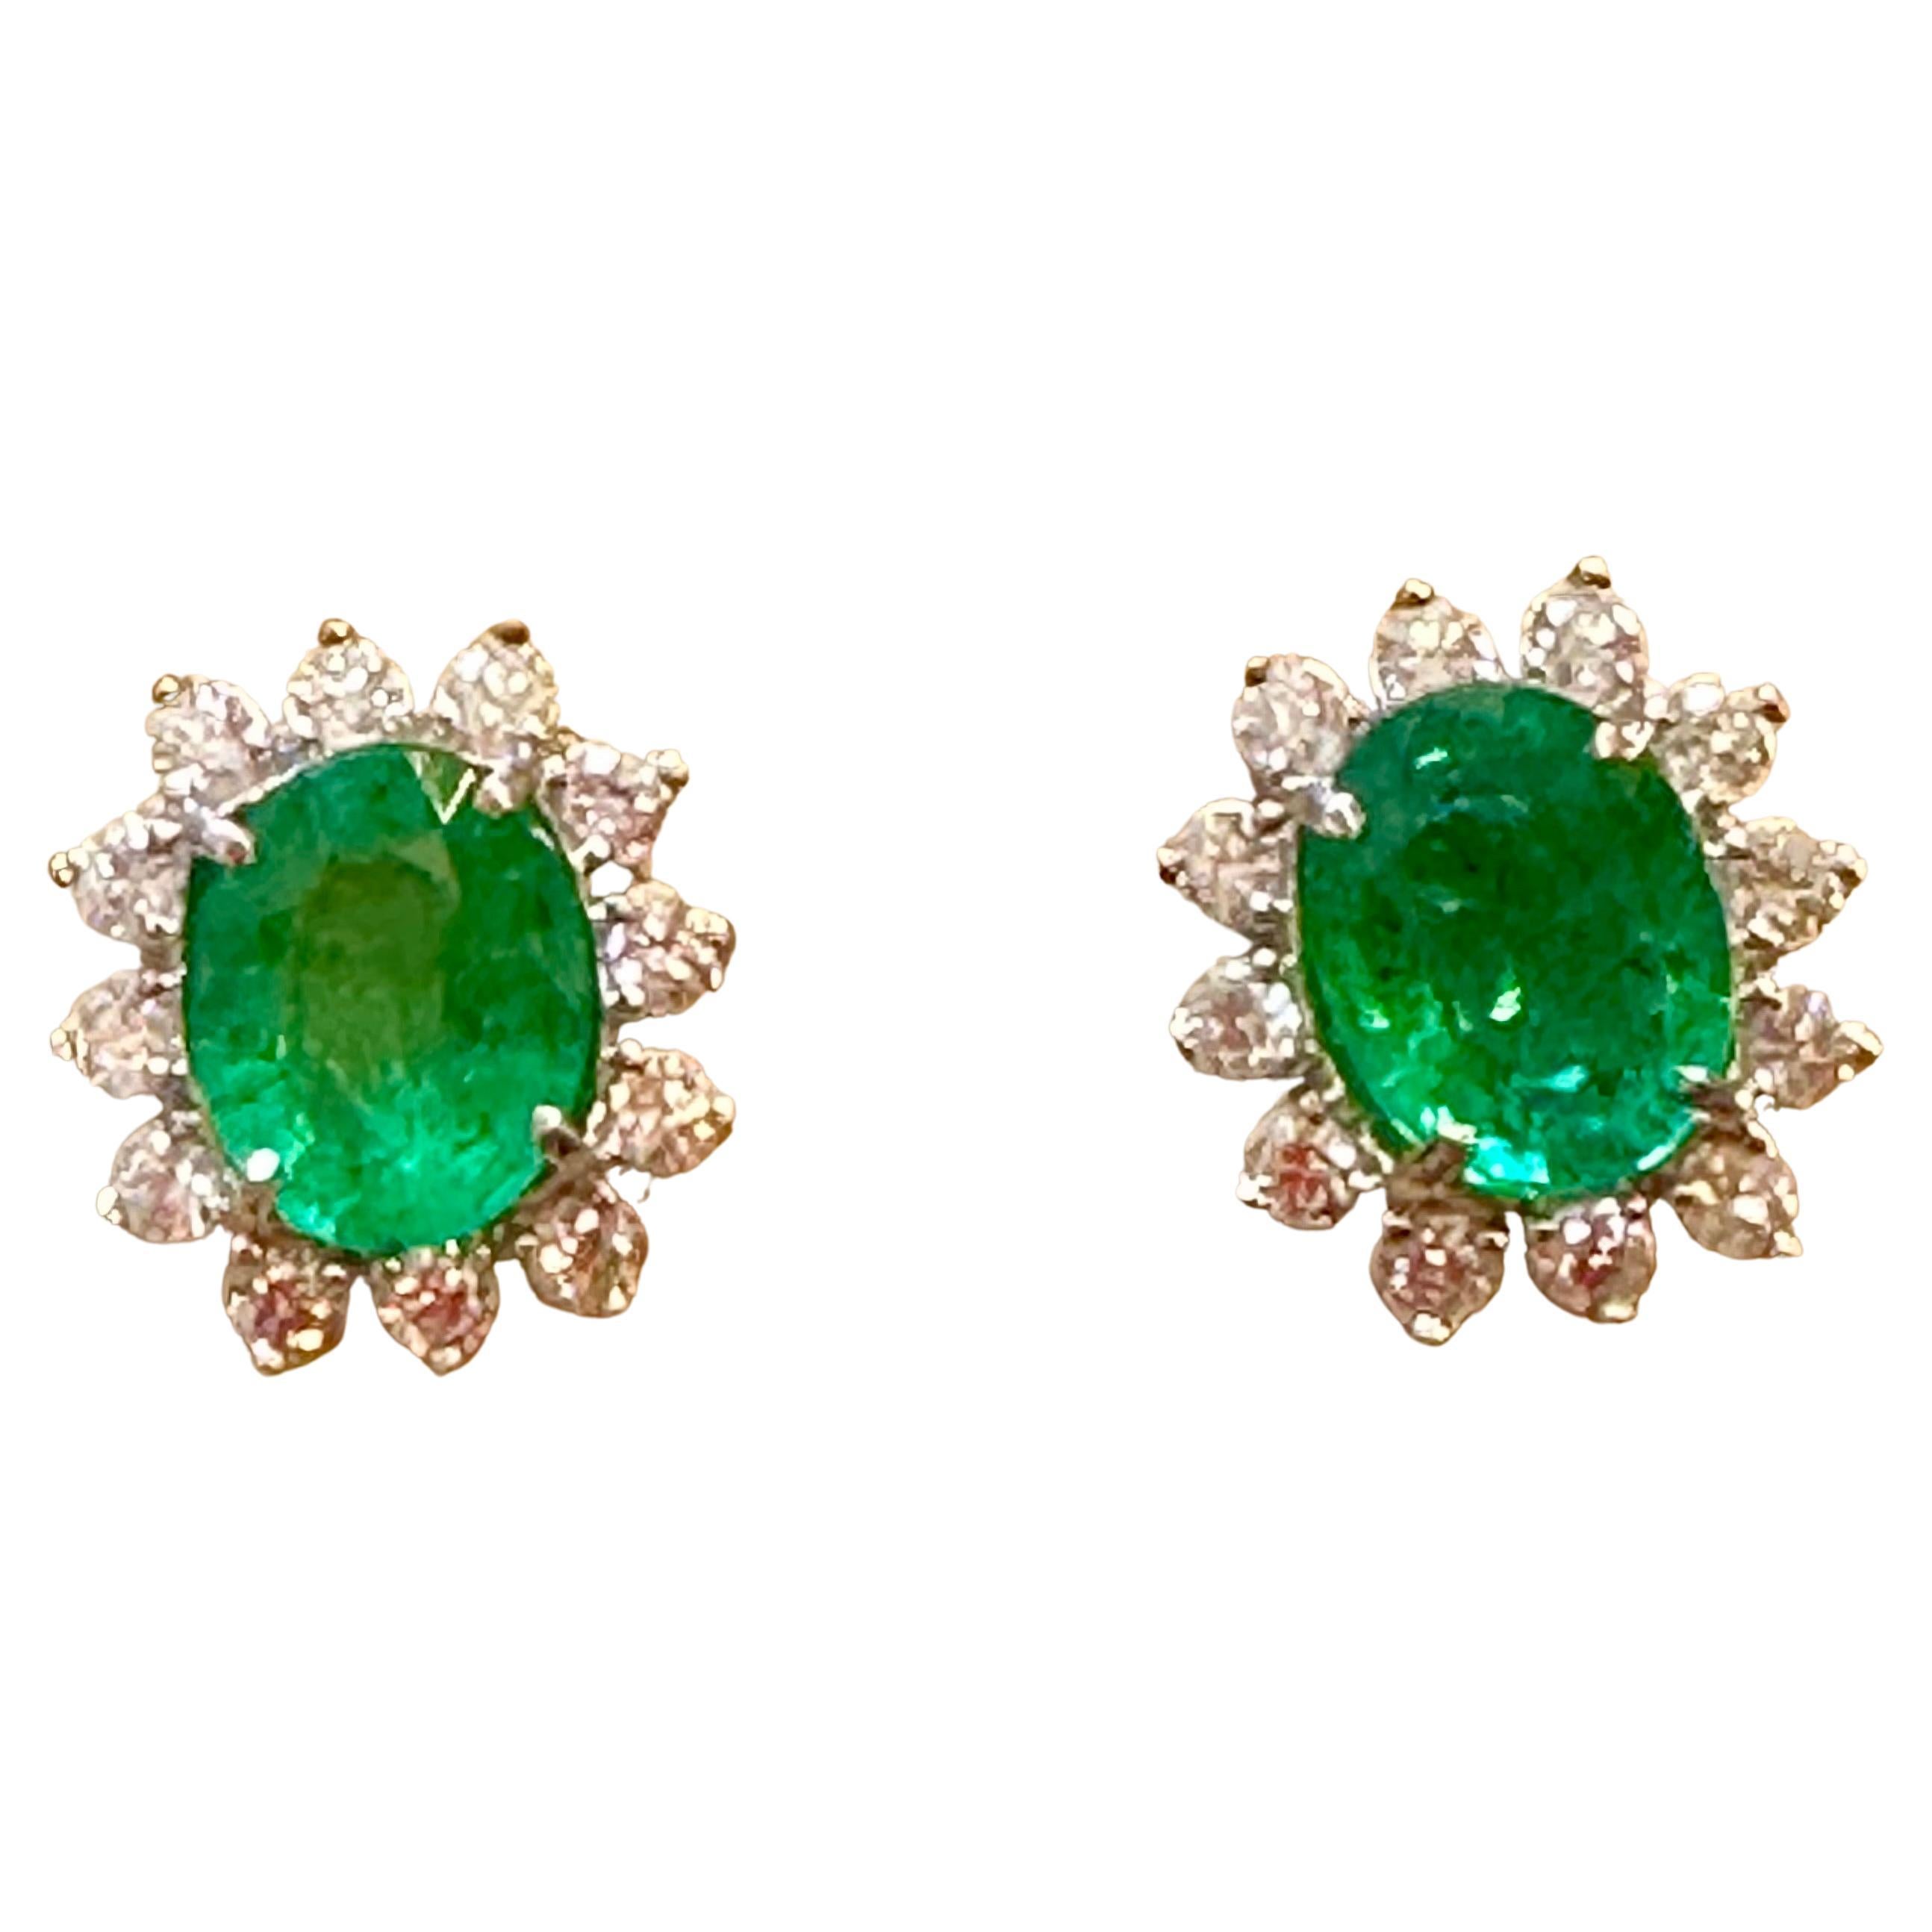 
Approximately 8 Carat Oval Shape Natural Colombian Emerald & 2.5 ct Diamond Post Back Earrings 14 Karat White Gold
Two emerald weighing approximately 8 carats Total. extra fine emerald with hardly any black dots or inclusions.
I have taken video